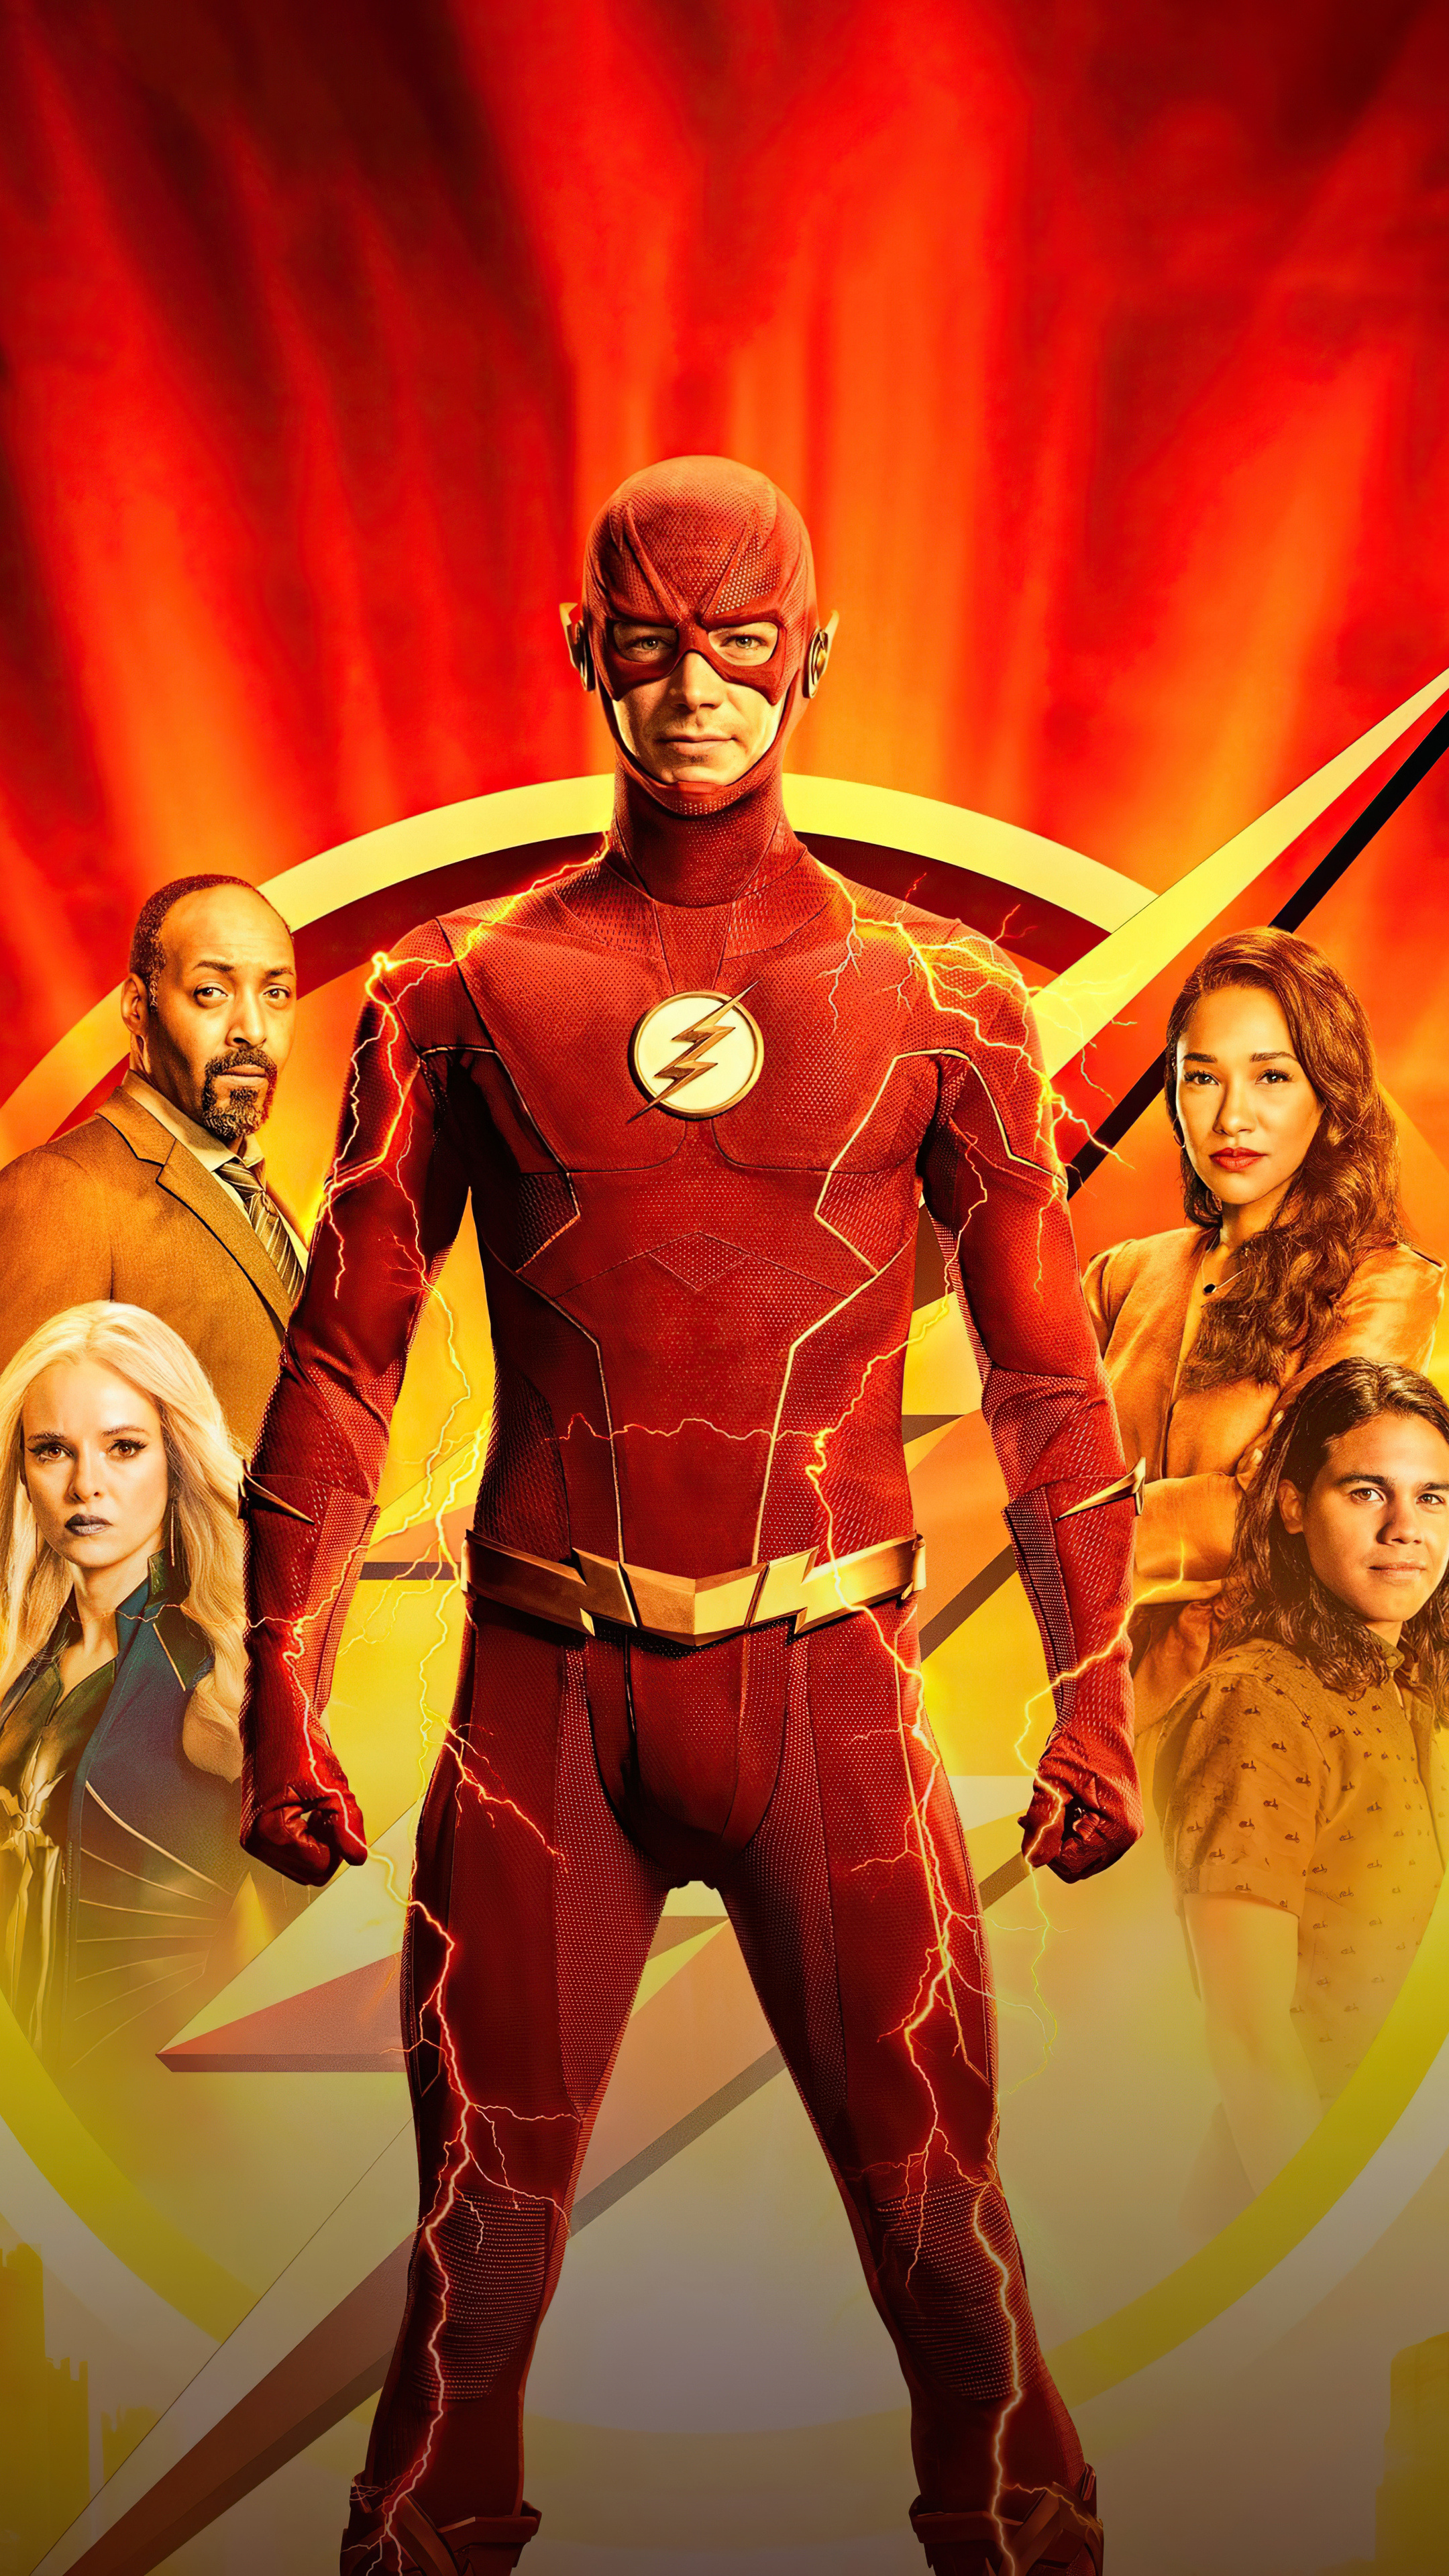 Flash (TV Series): Superhero film based on the Barry Allen incarnation of DC Comics character. 2160x3840 4K Background.